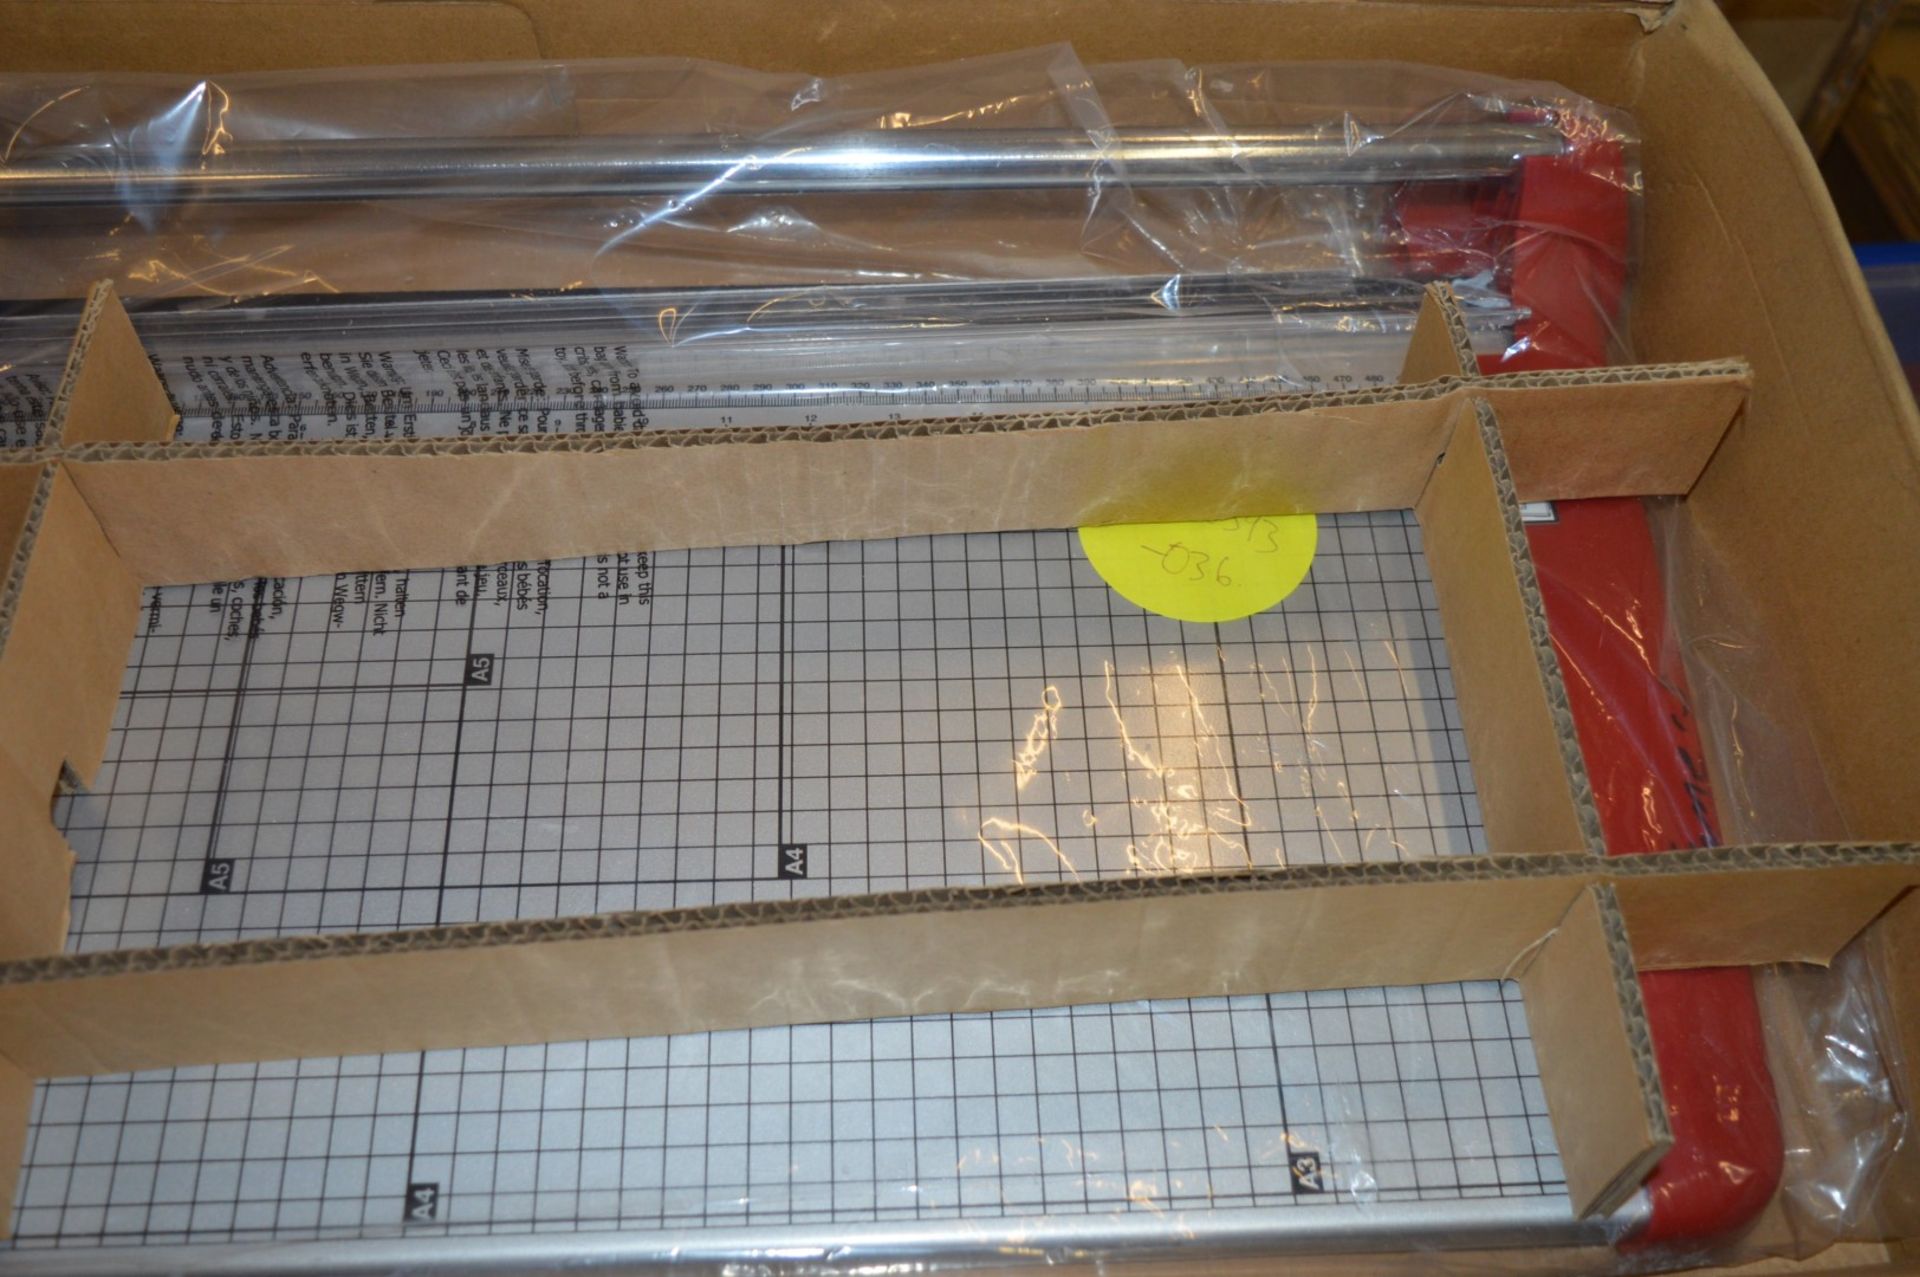 1 x Razorback A3 Heavy Duty Rotary Paper Trimmer - Unused in Original Box - Self Sharpening - Strong - Image 6 of 7